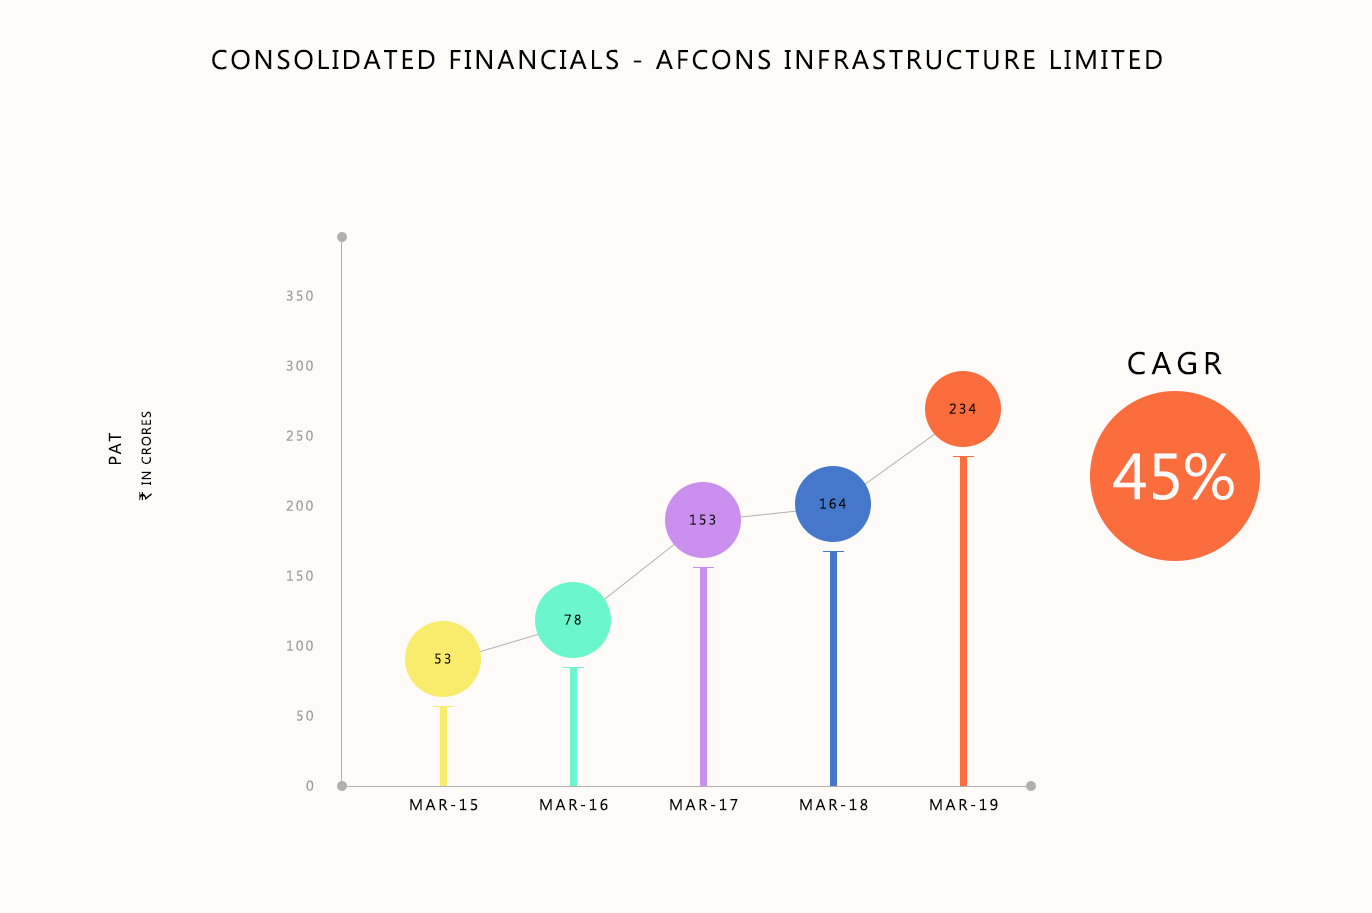 afcons infrastructure limited, andheri west